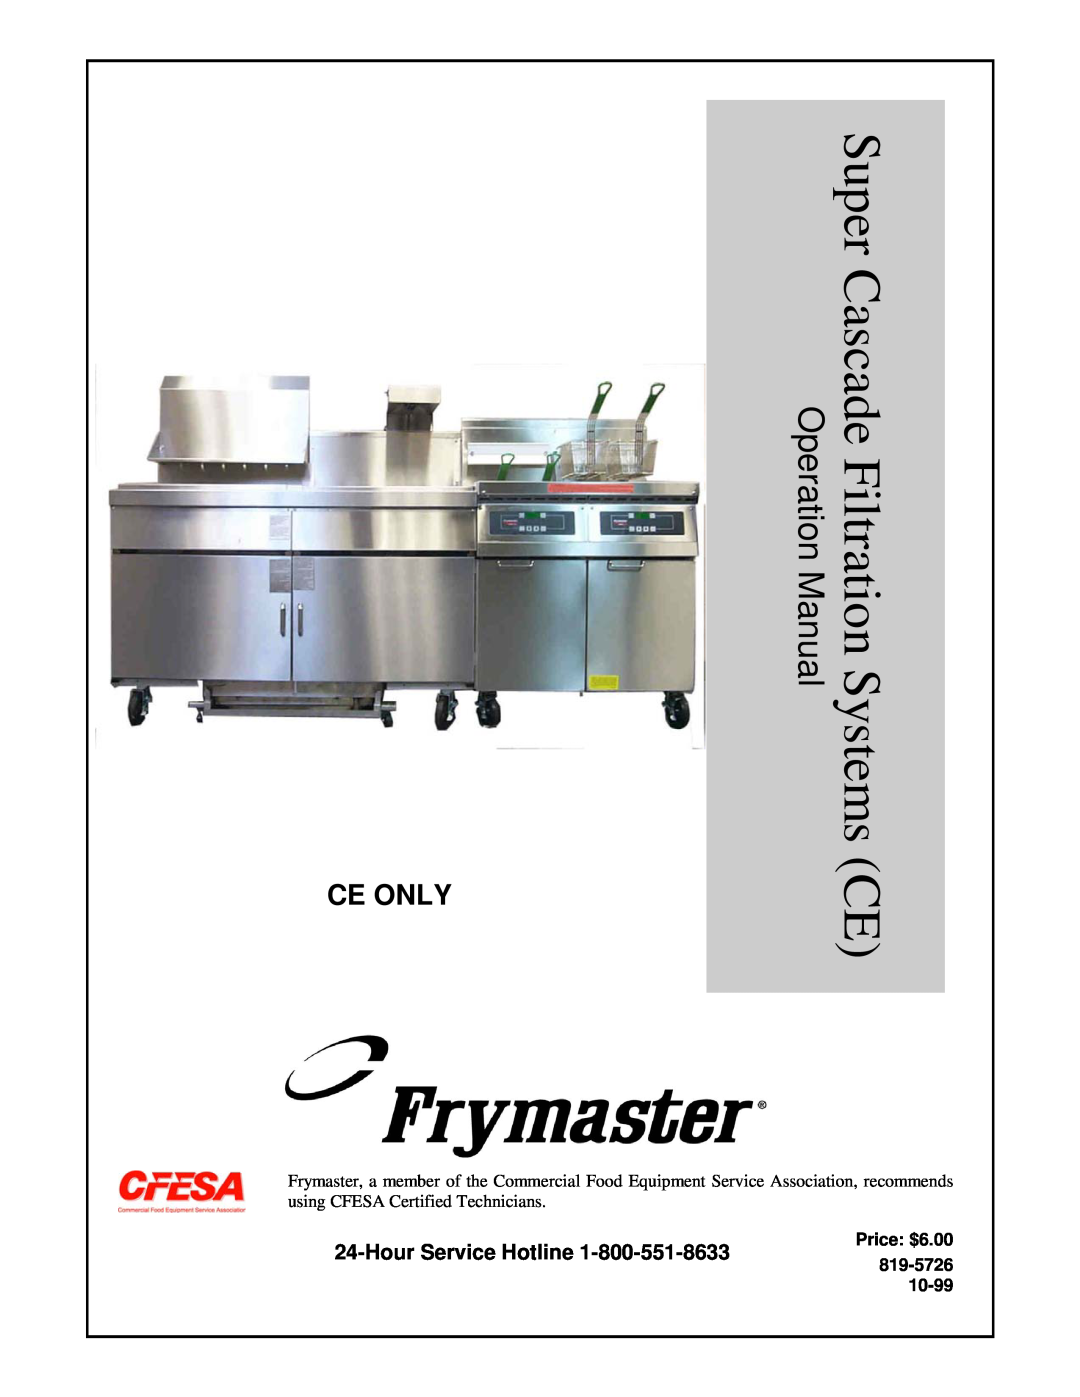 Frymaster CE operation manual Super Cascade Filtration S, Ce Only, Hour Service Hotline, Price $6.00 